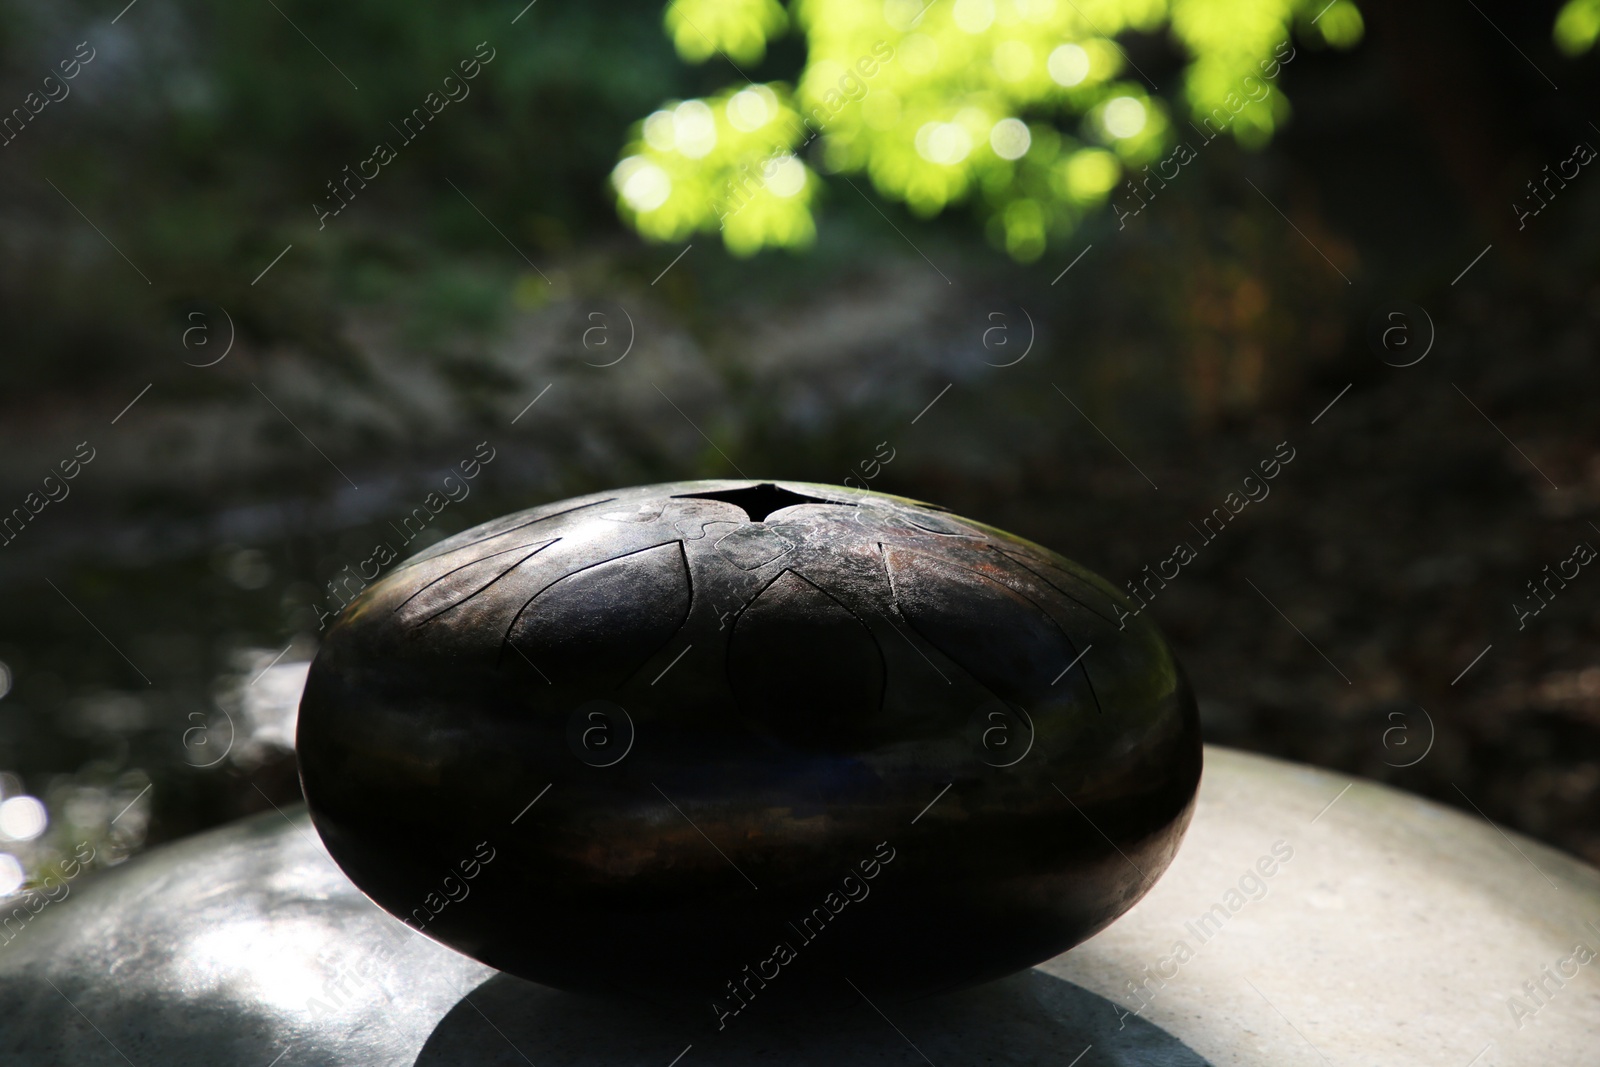 Photo of Steel tongue drum on stone outdoors. Percussion musical instrument